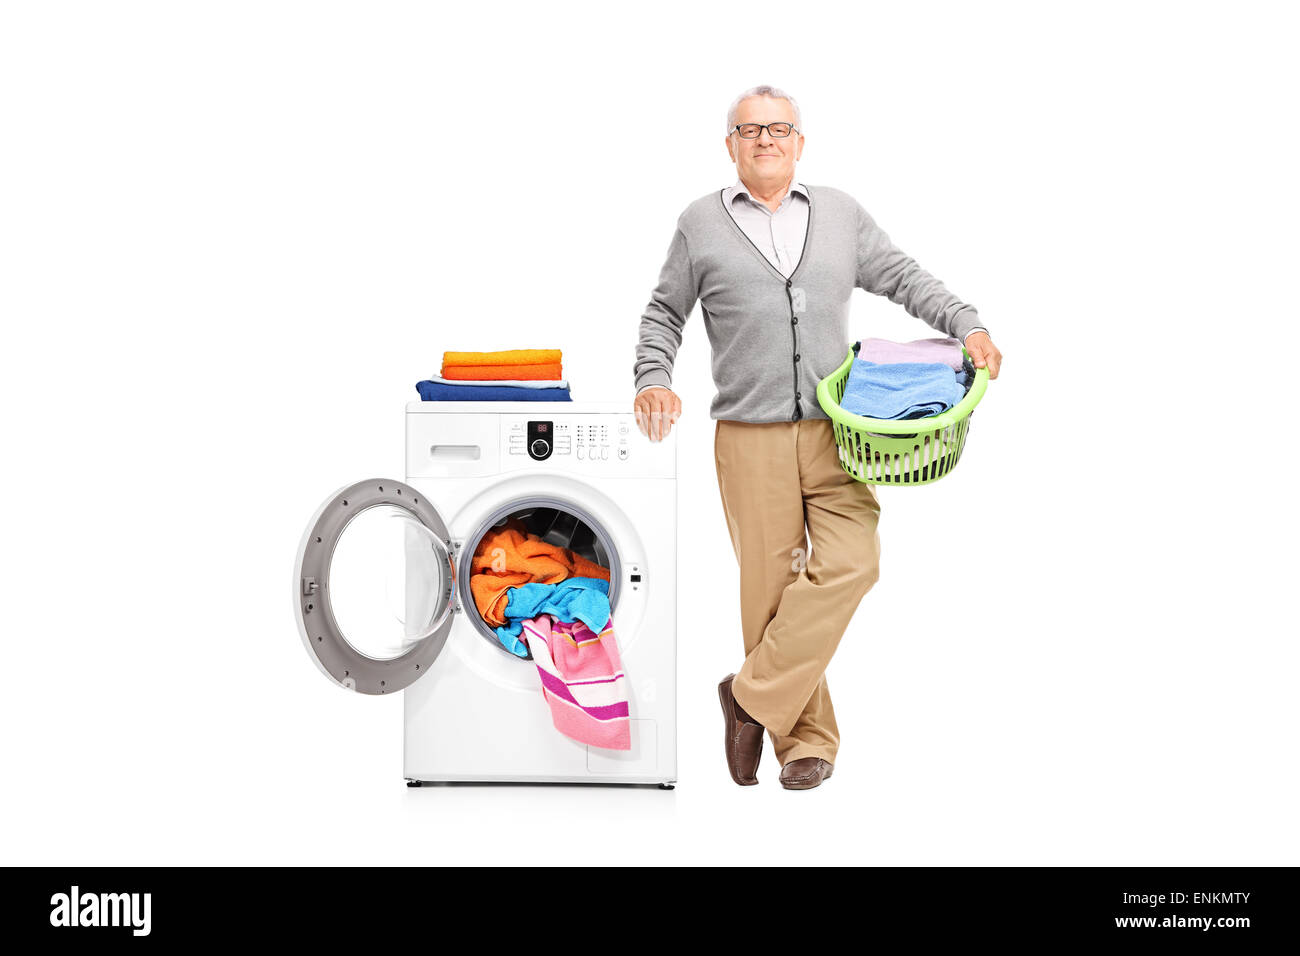 Senior gentleman holding a laundry basket full of clothes and posing next to a white washing machine Stock Photo